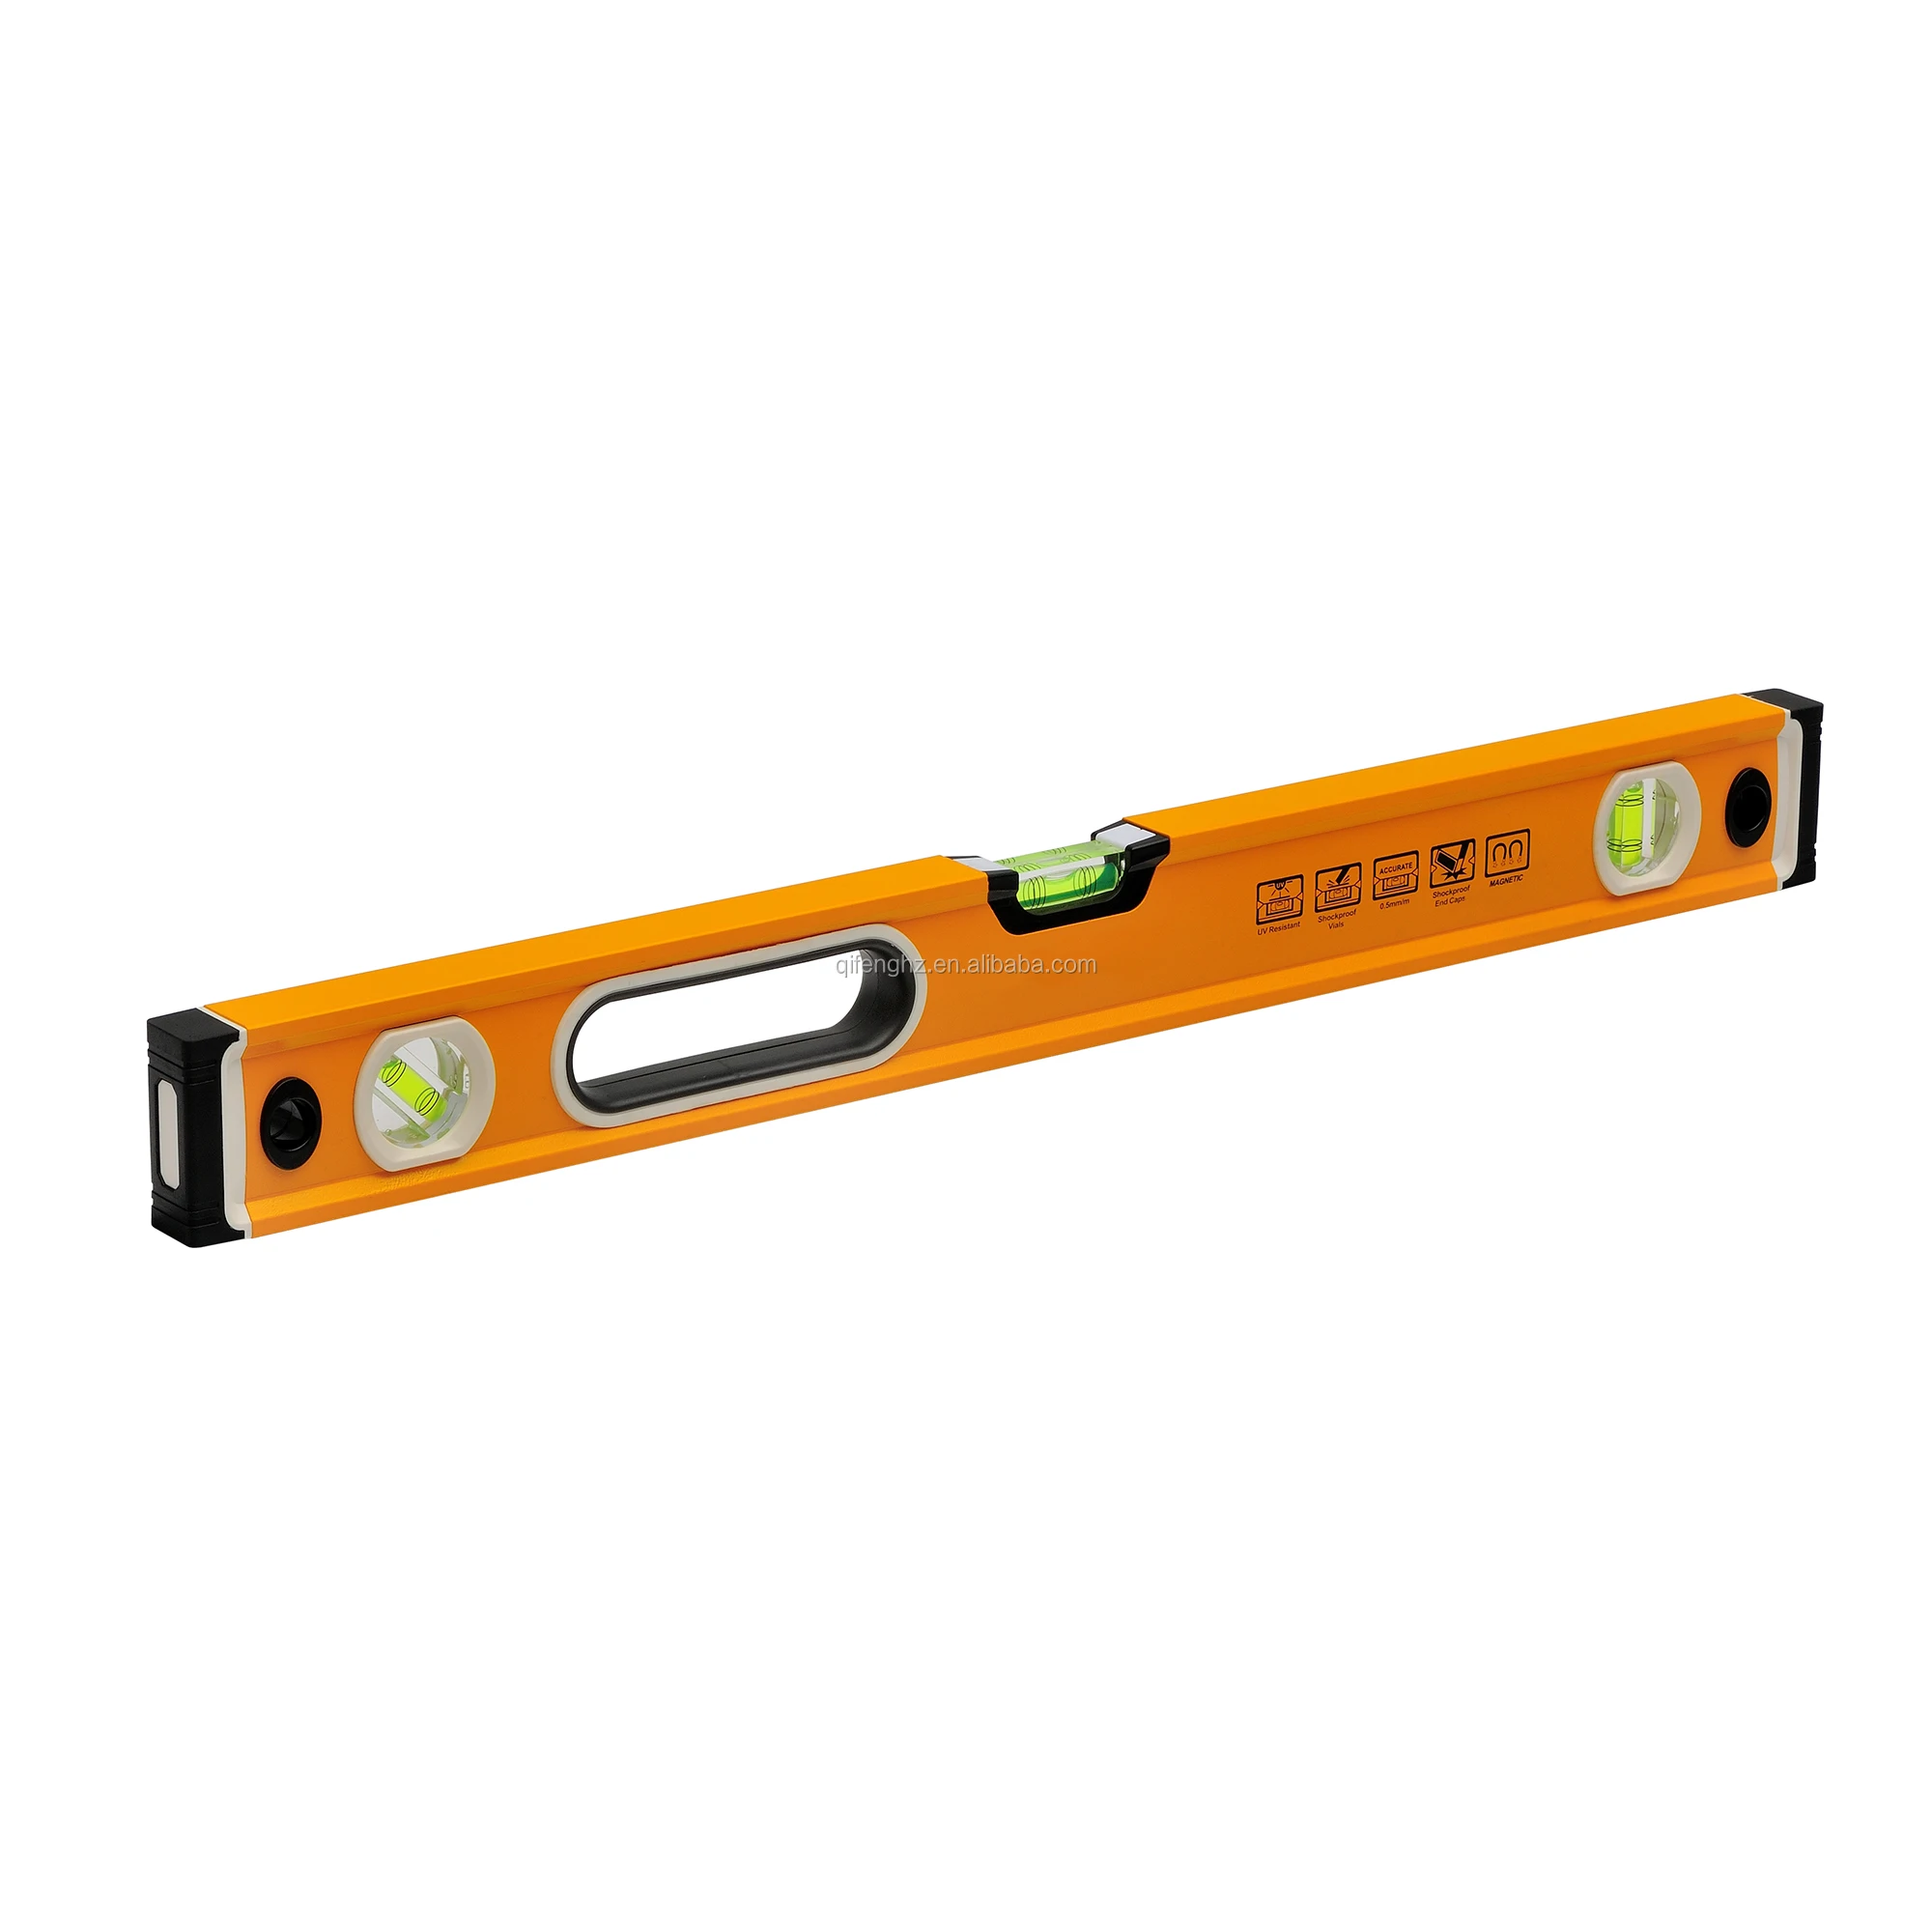 Heavy Duty Spirit Level with extra strength profile and milled edges 1200mm 